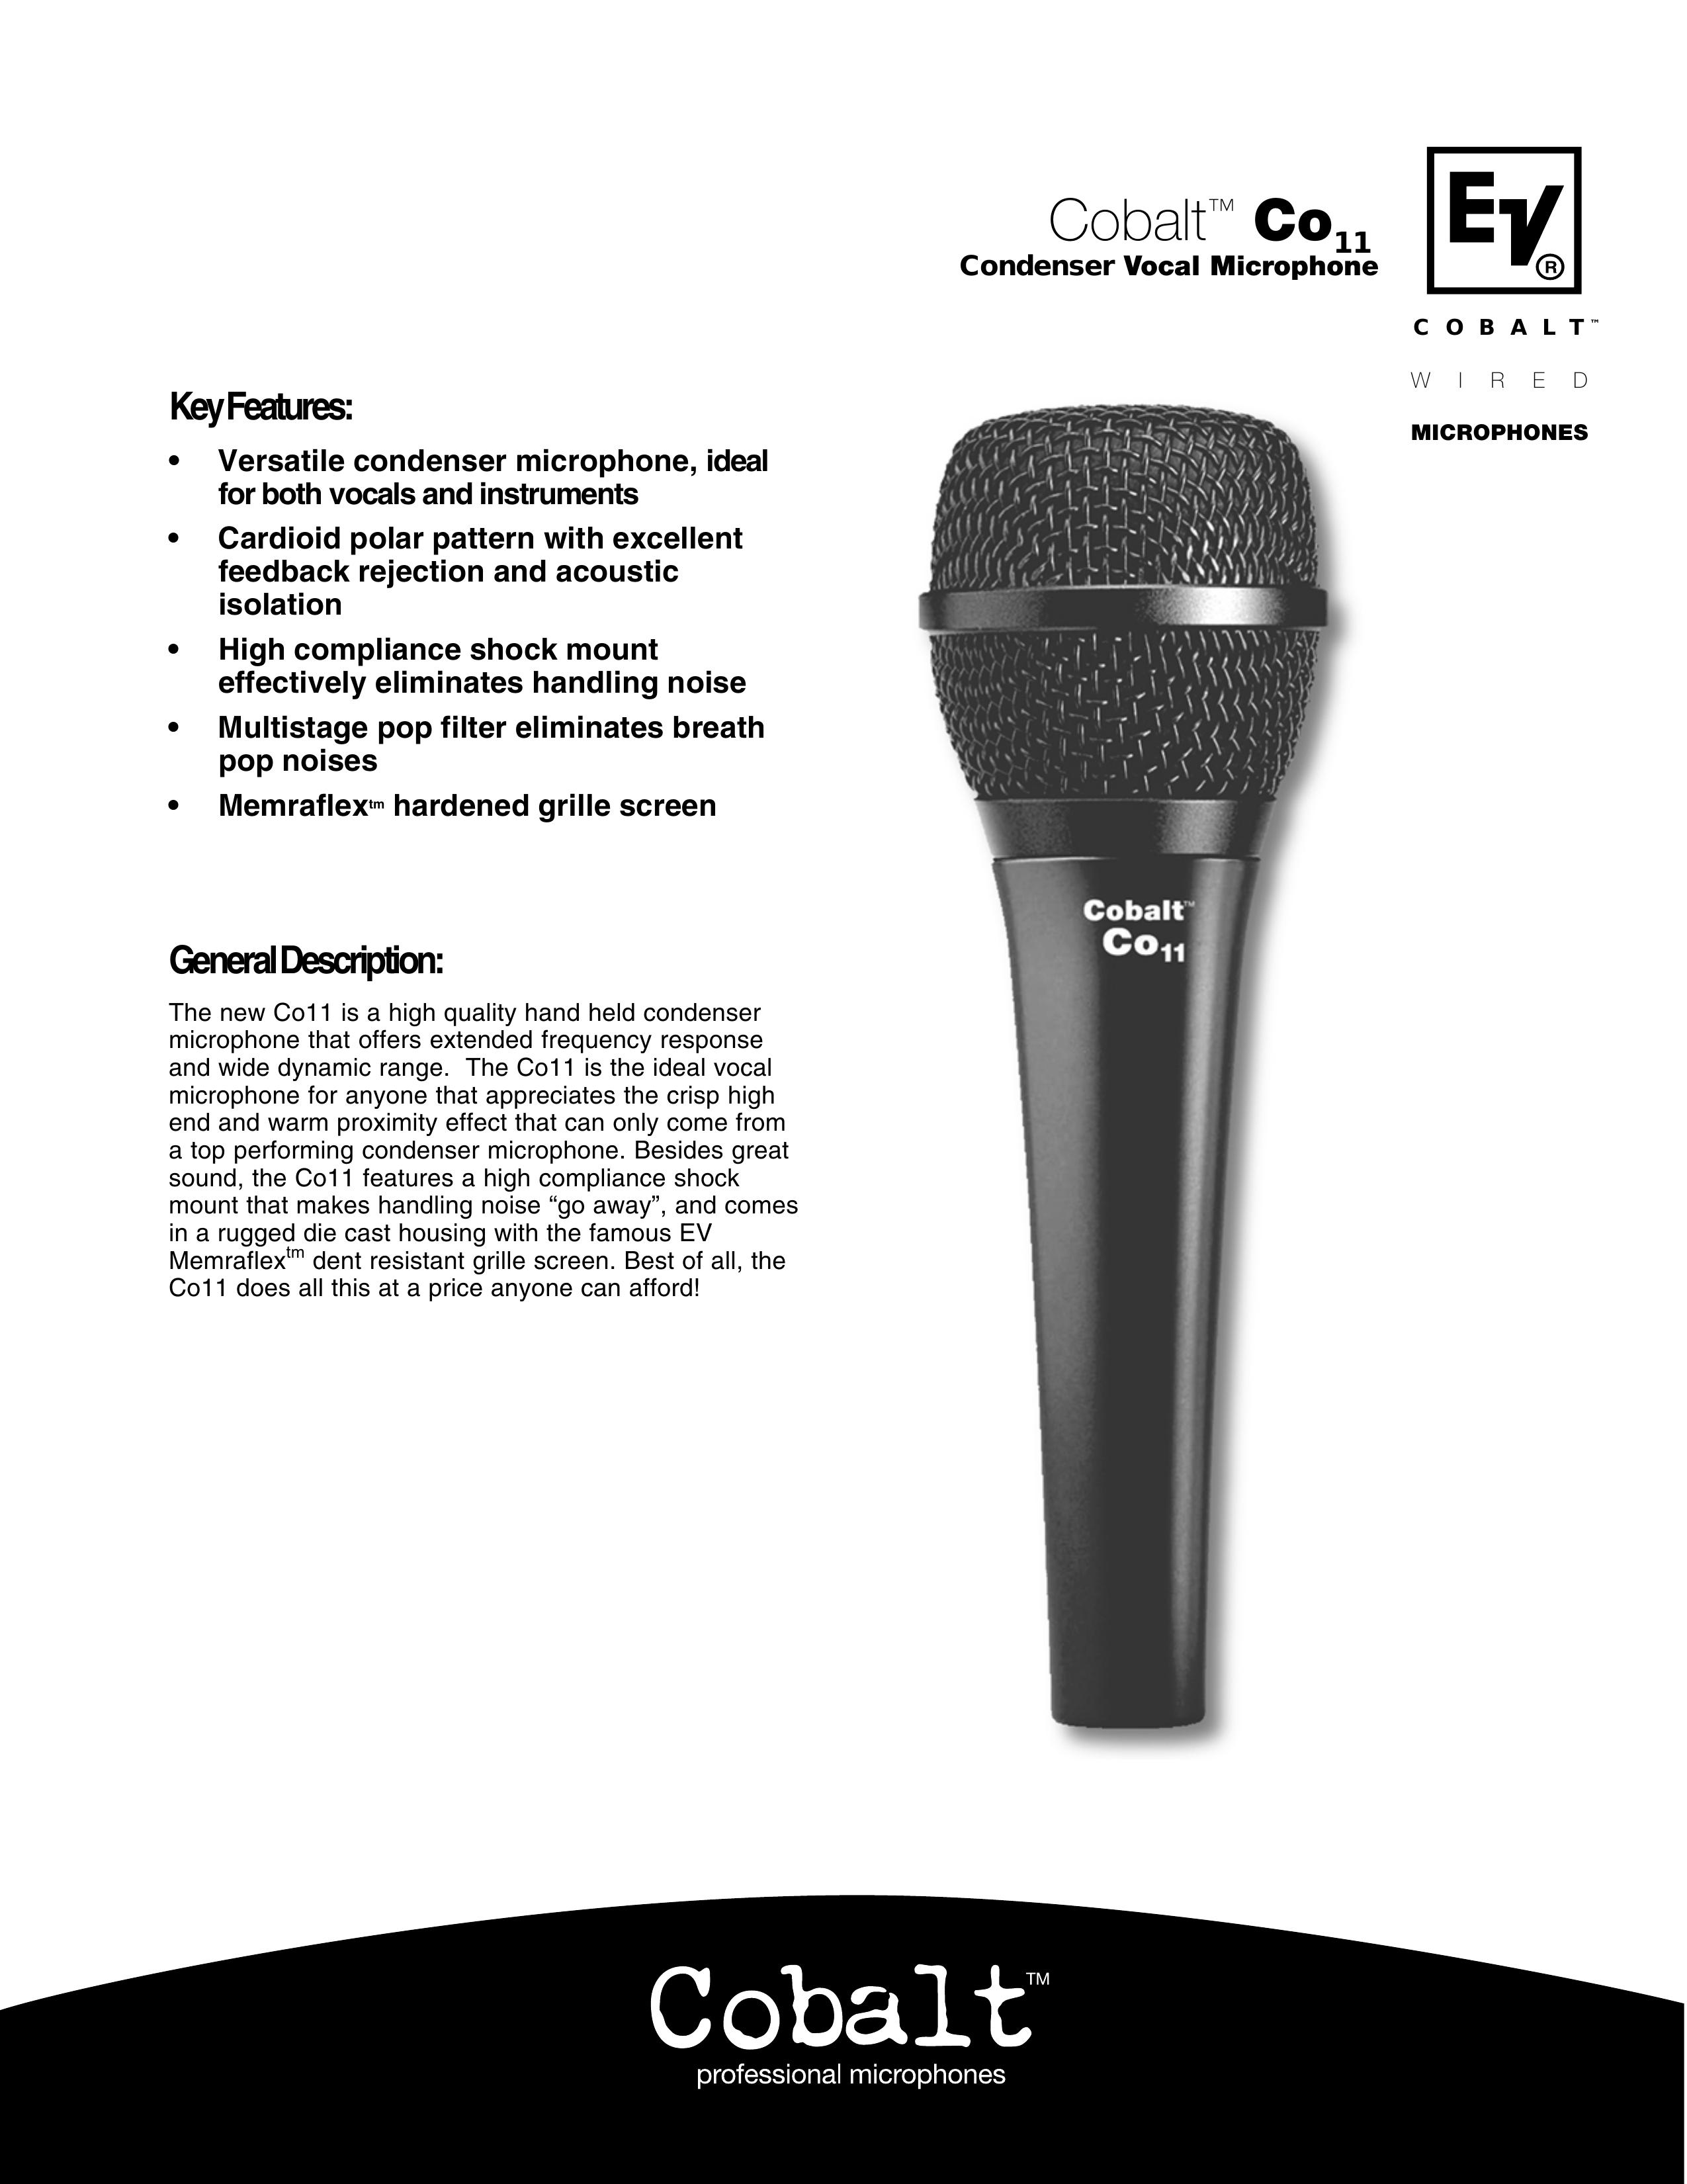 Cobalt Networks Co11 Microphone User Manual